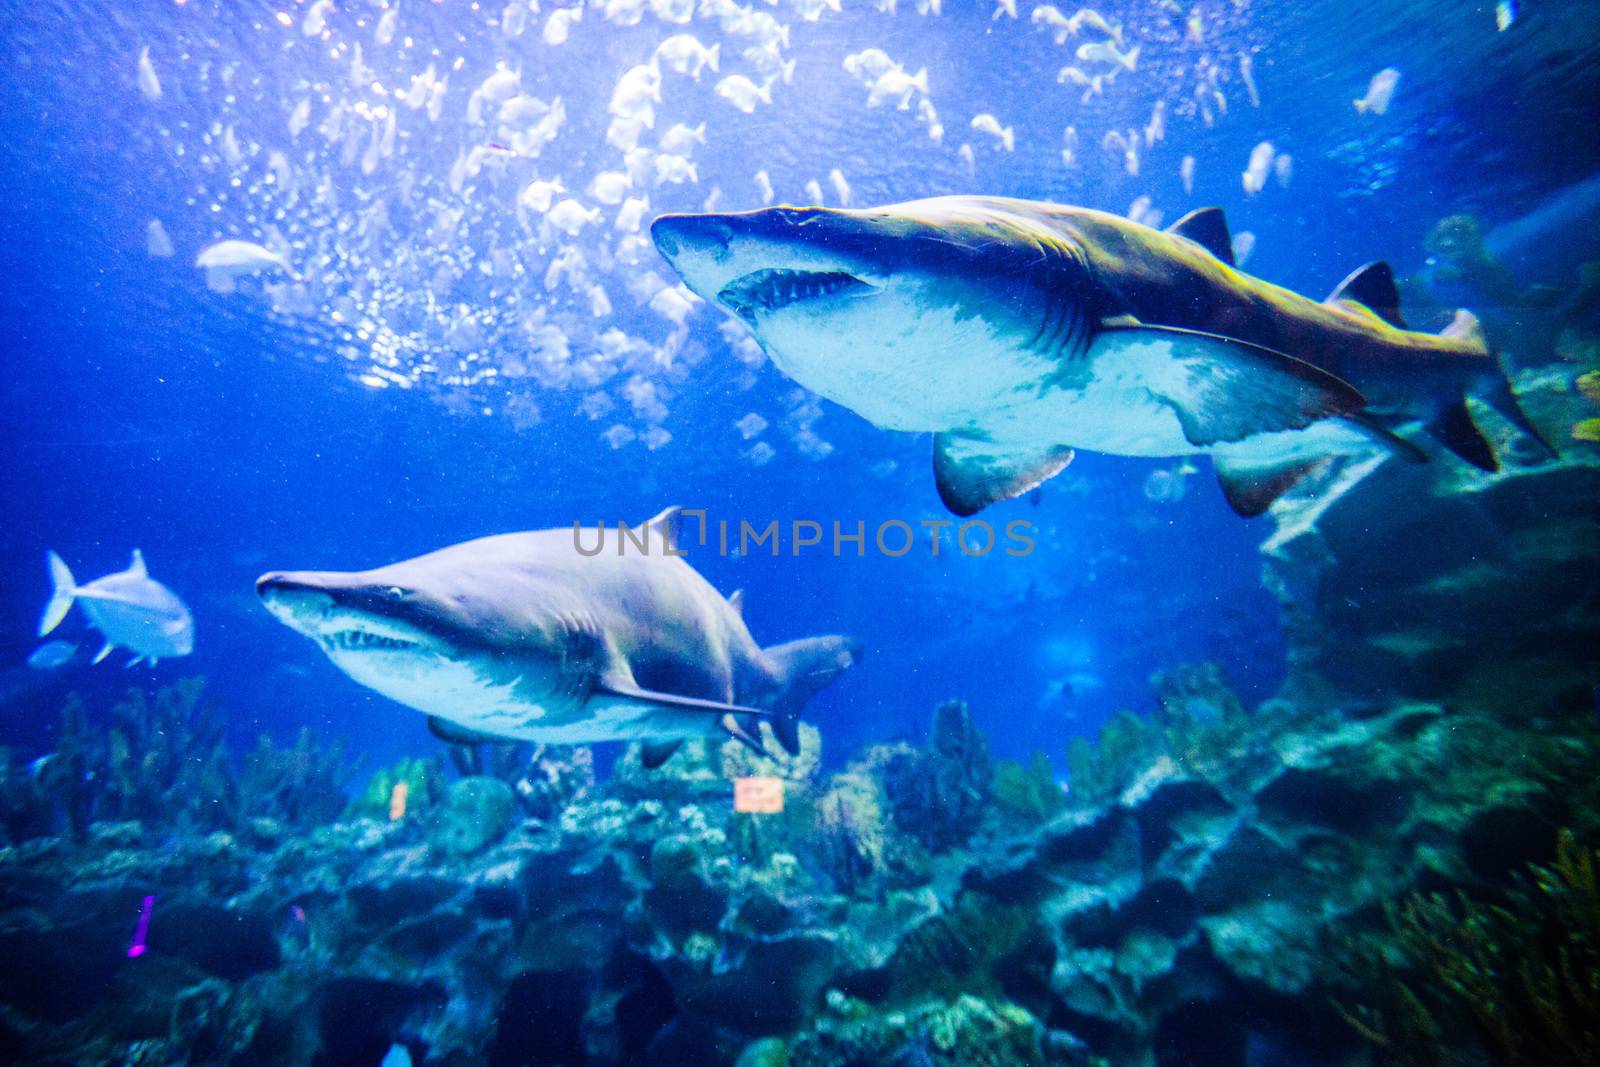 Two sharks underwater view by Yellowj